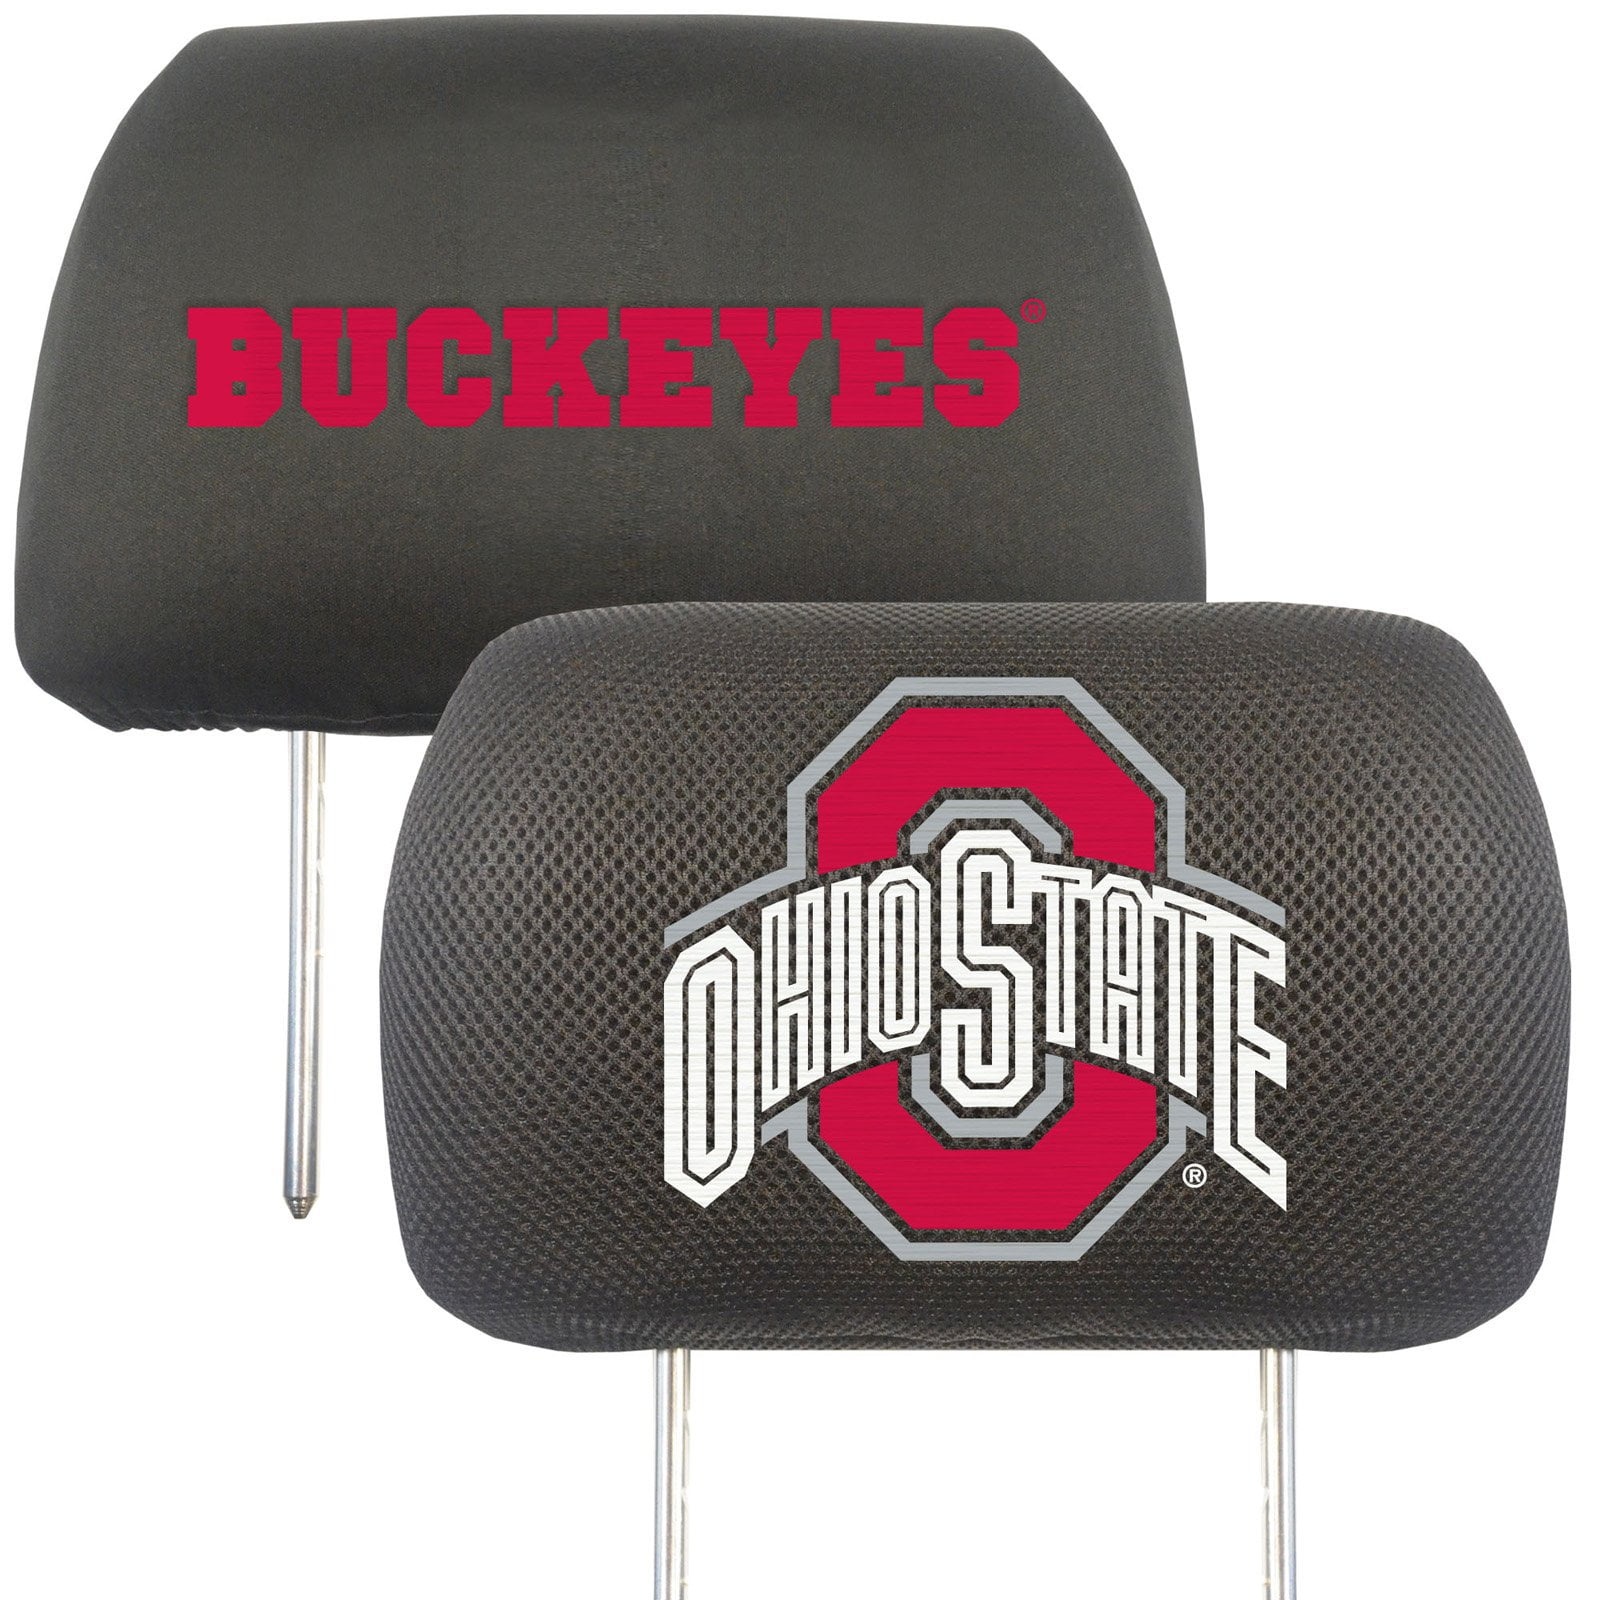 Perfect to Ohio State Buckeyes Fan Logo On Front and Rear Auto Floor Liner Ohio State University Automotive Gift Set.Wow You get 2 Head Rest Cover 4 Floor Mat and 1 Wheel Cover in this gift set